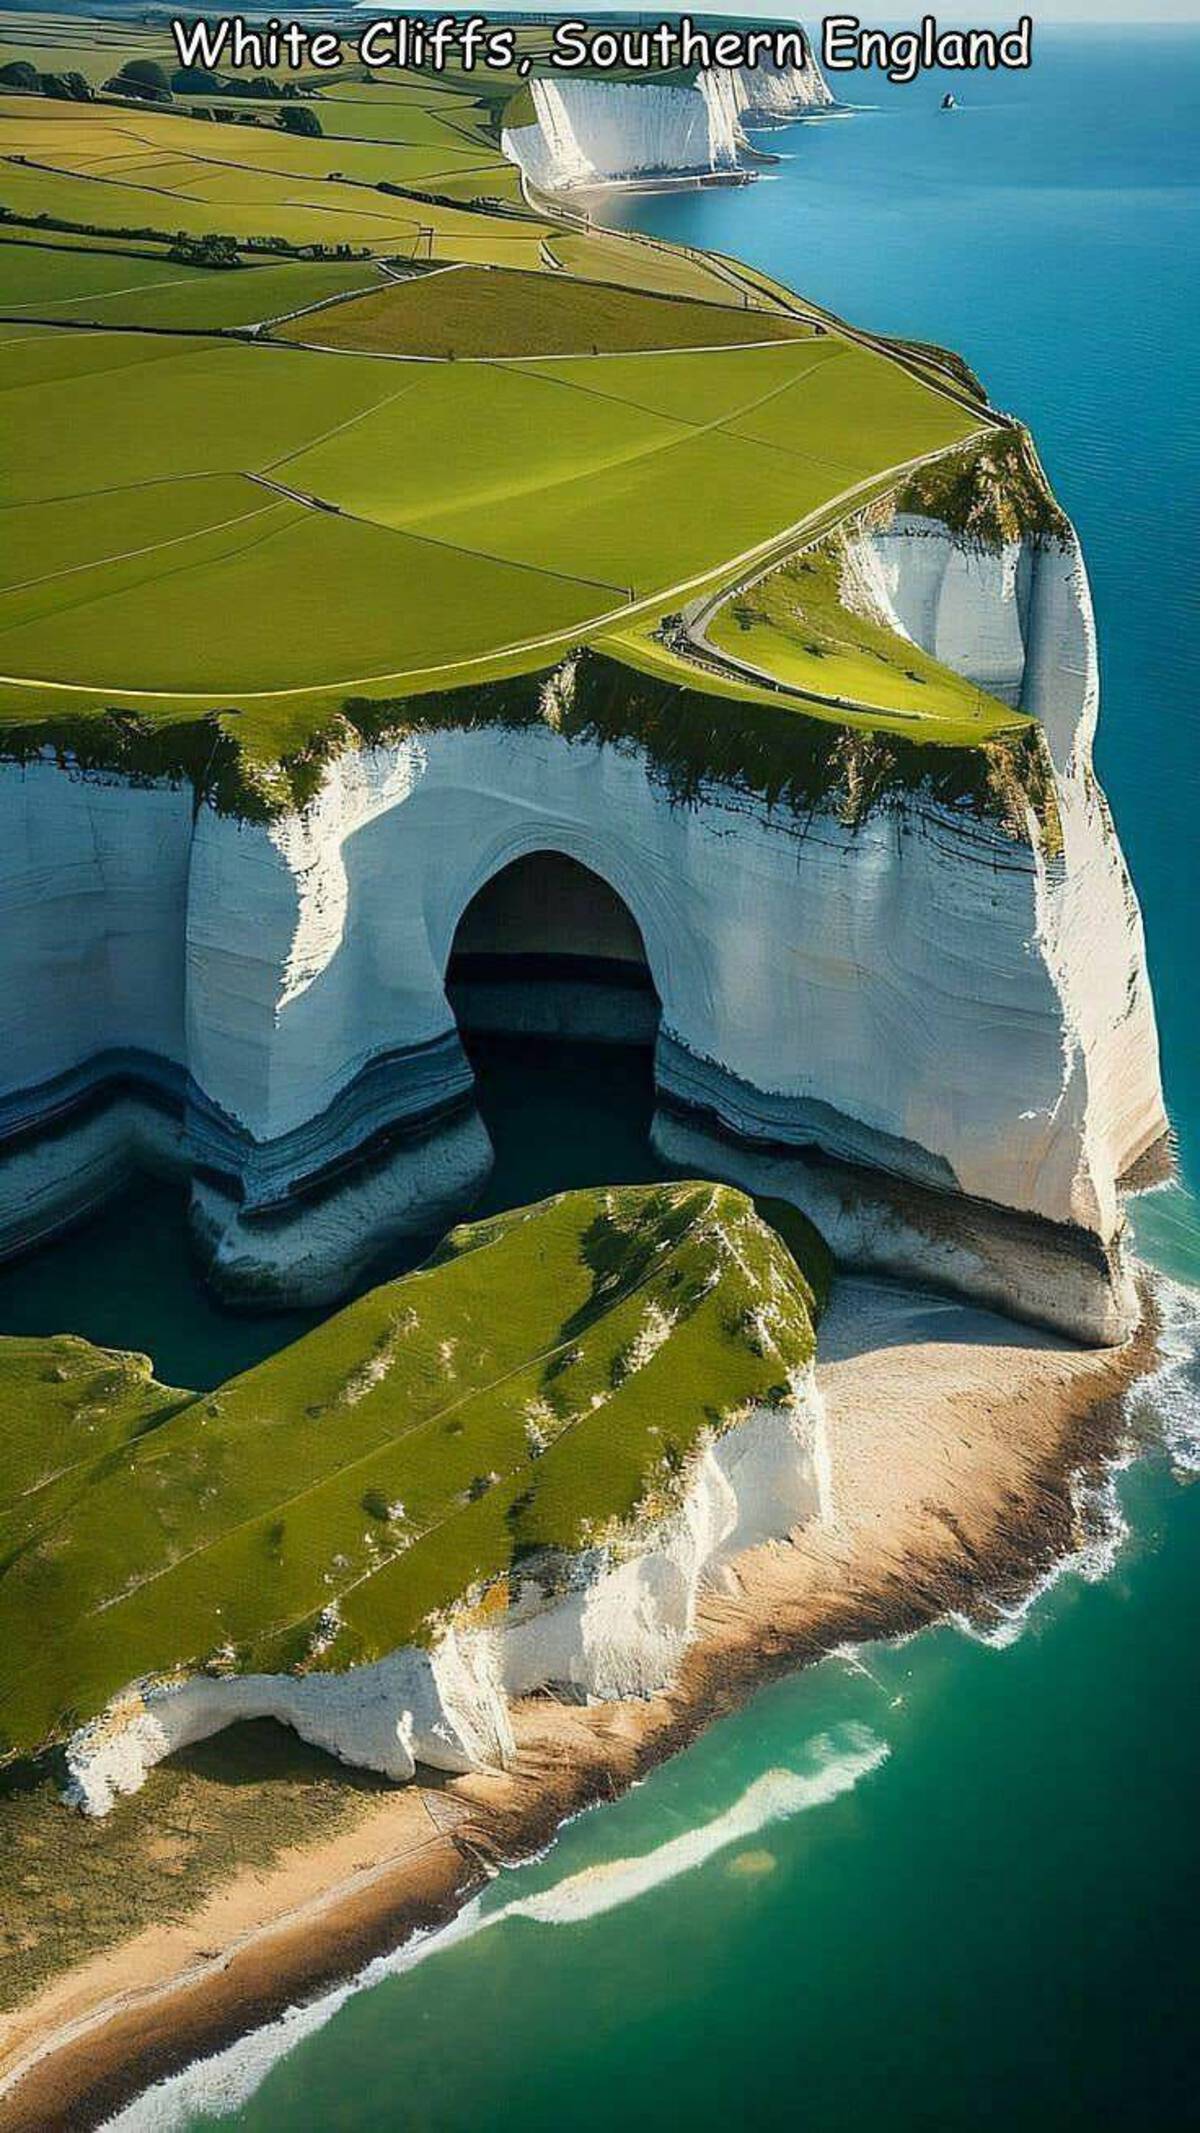 water resources - White Cliffs, Southern England